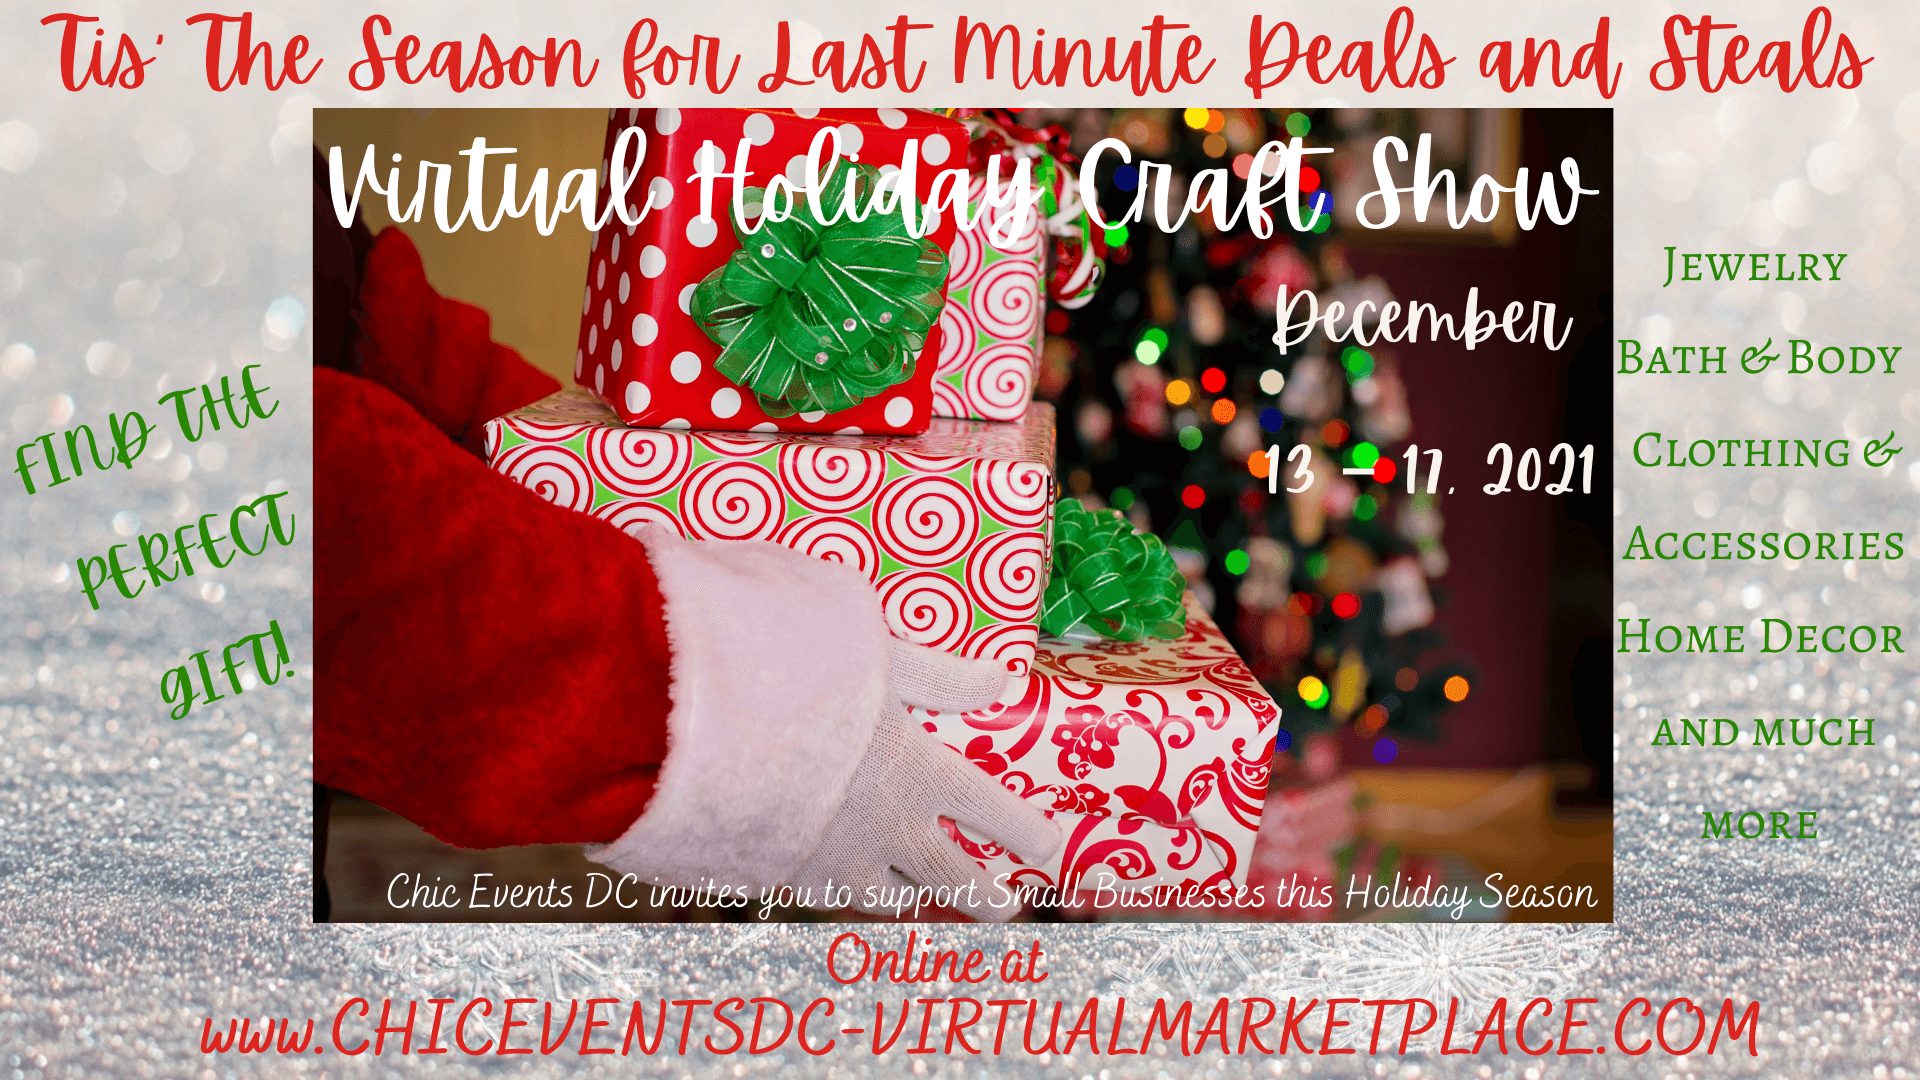 LAST MINUTE DEALS & STEALS HOLIDAY SHOW